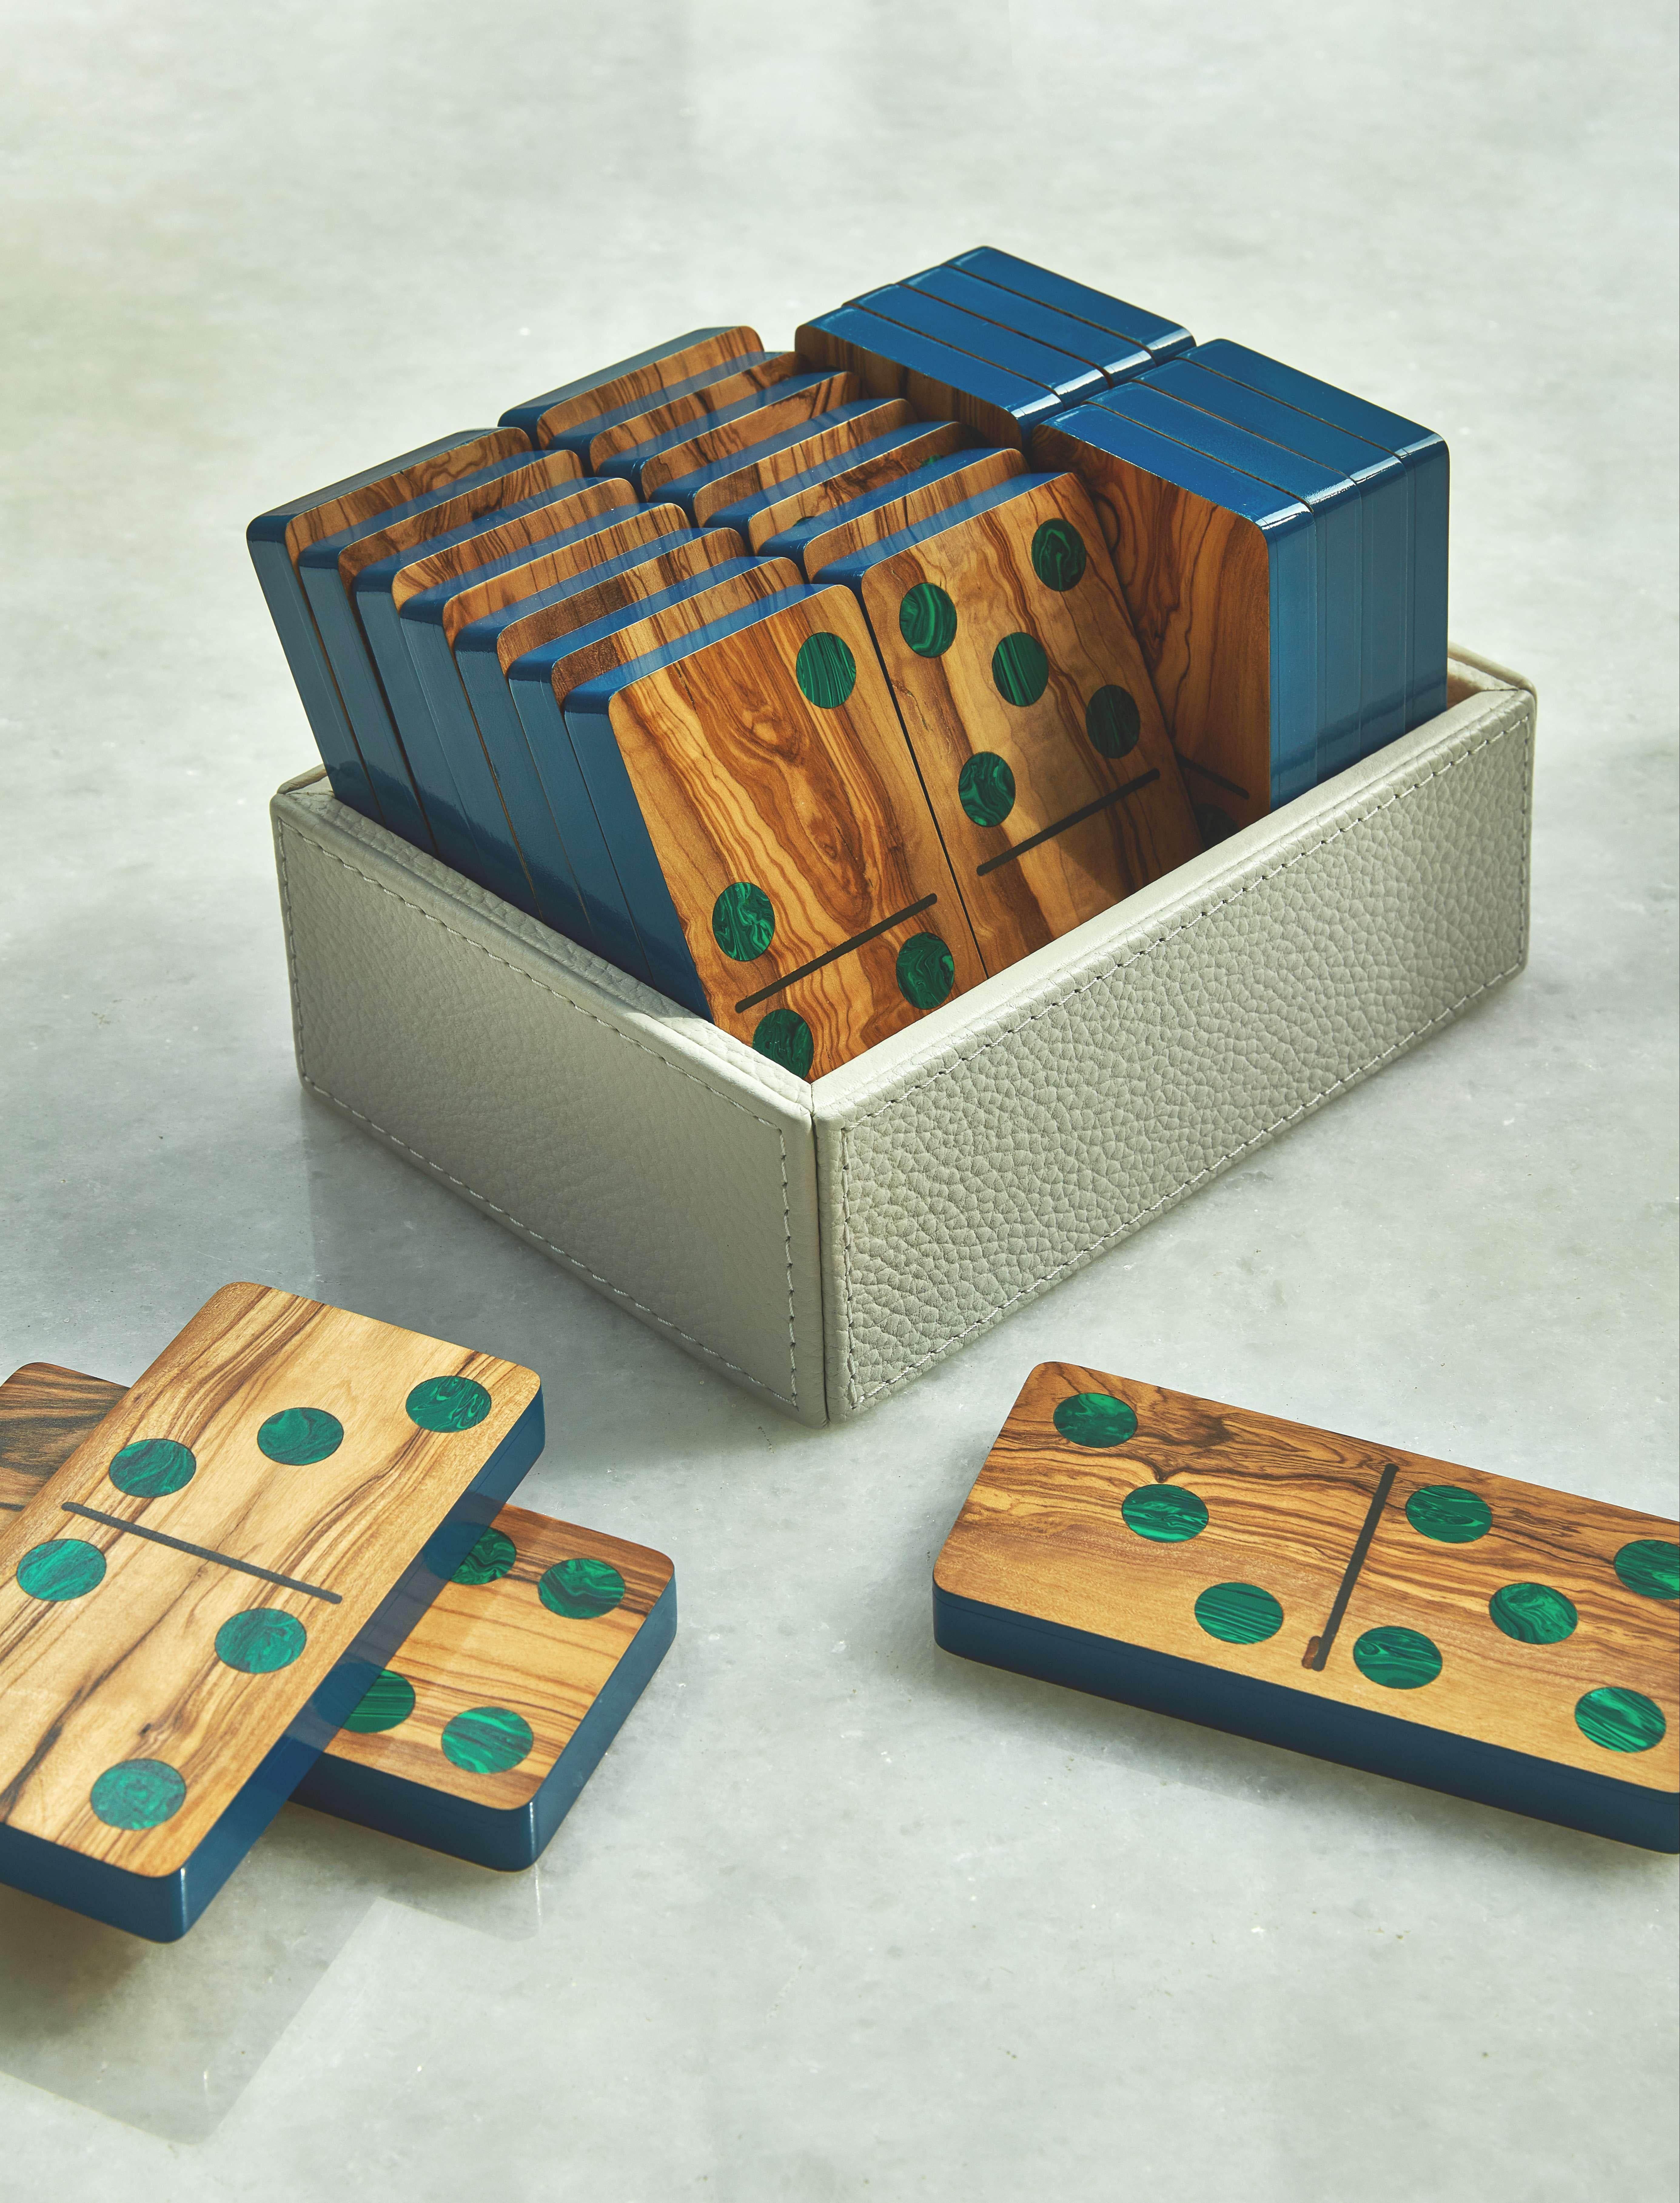 Our large Domino set is composed of 28 pieces of olive wood with malachite inlay. Each piece is outlined in blue polyurethane paint and elegantly stored in a leather box.

Nothing better than having fun, and if you can do it in style even better.